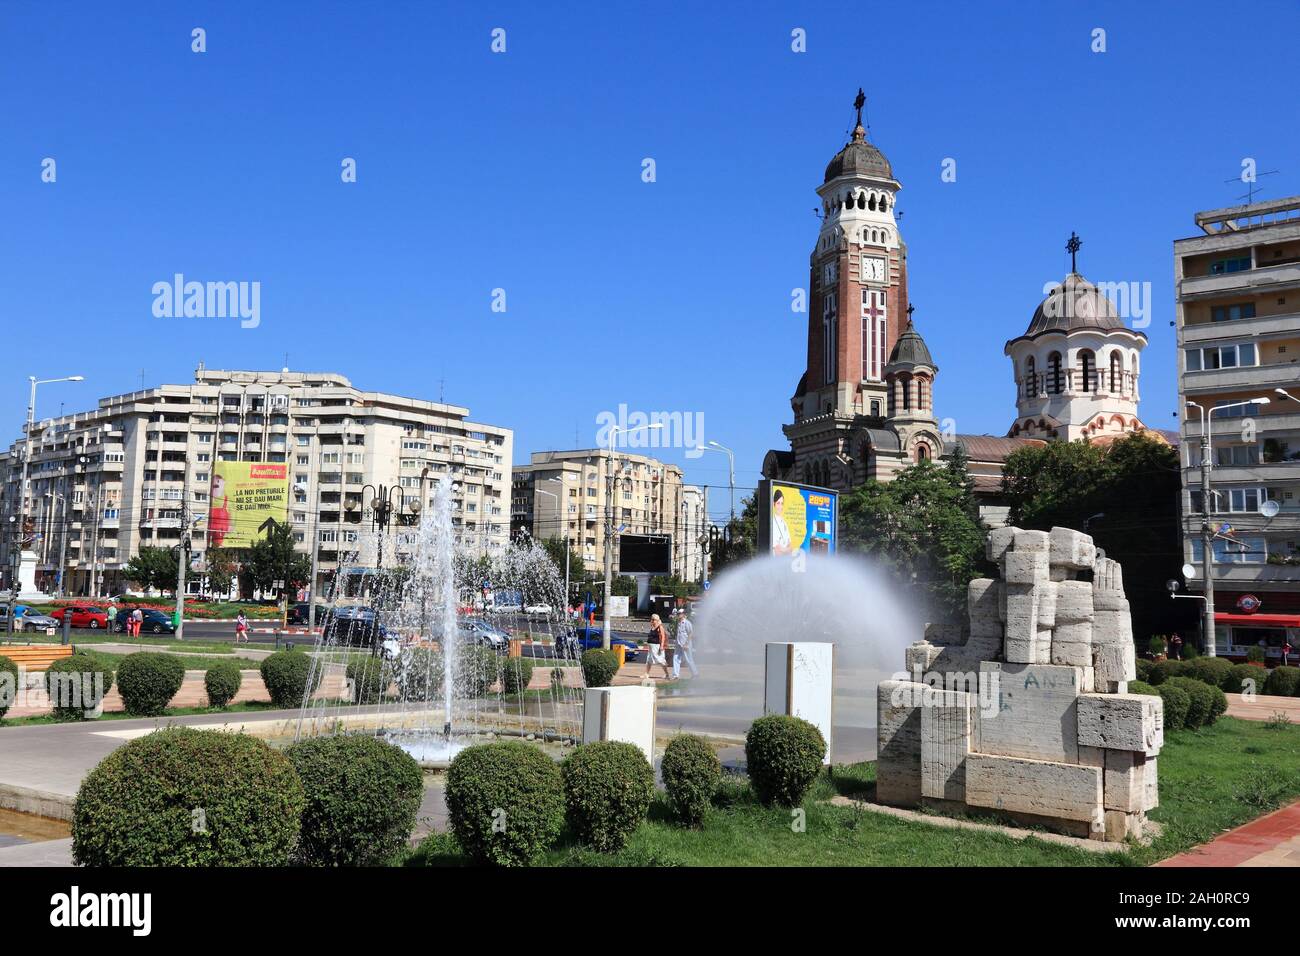 PLOIESTI, ROMANIA - AUGUST 20, 2012: City square in Ploiesti, Romania. Ploiesti is the 9th largest city in Romania and exists since 1596. It is famous Stock Photo